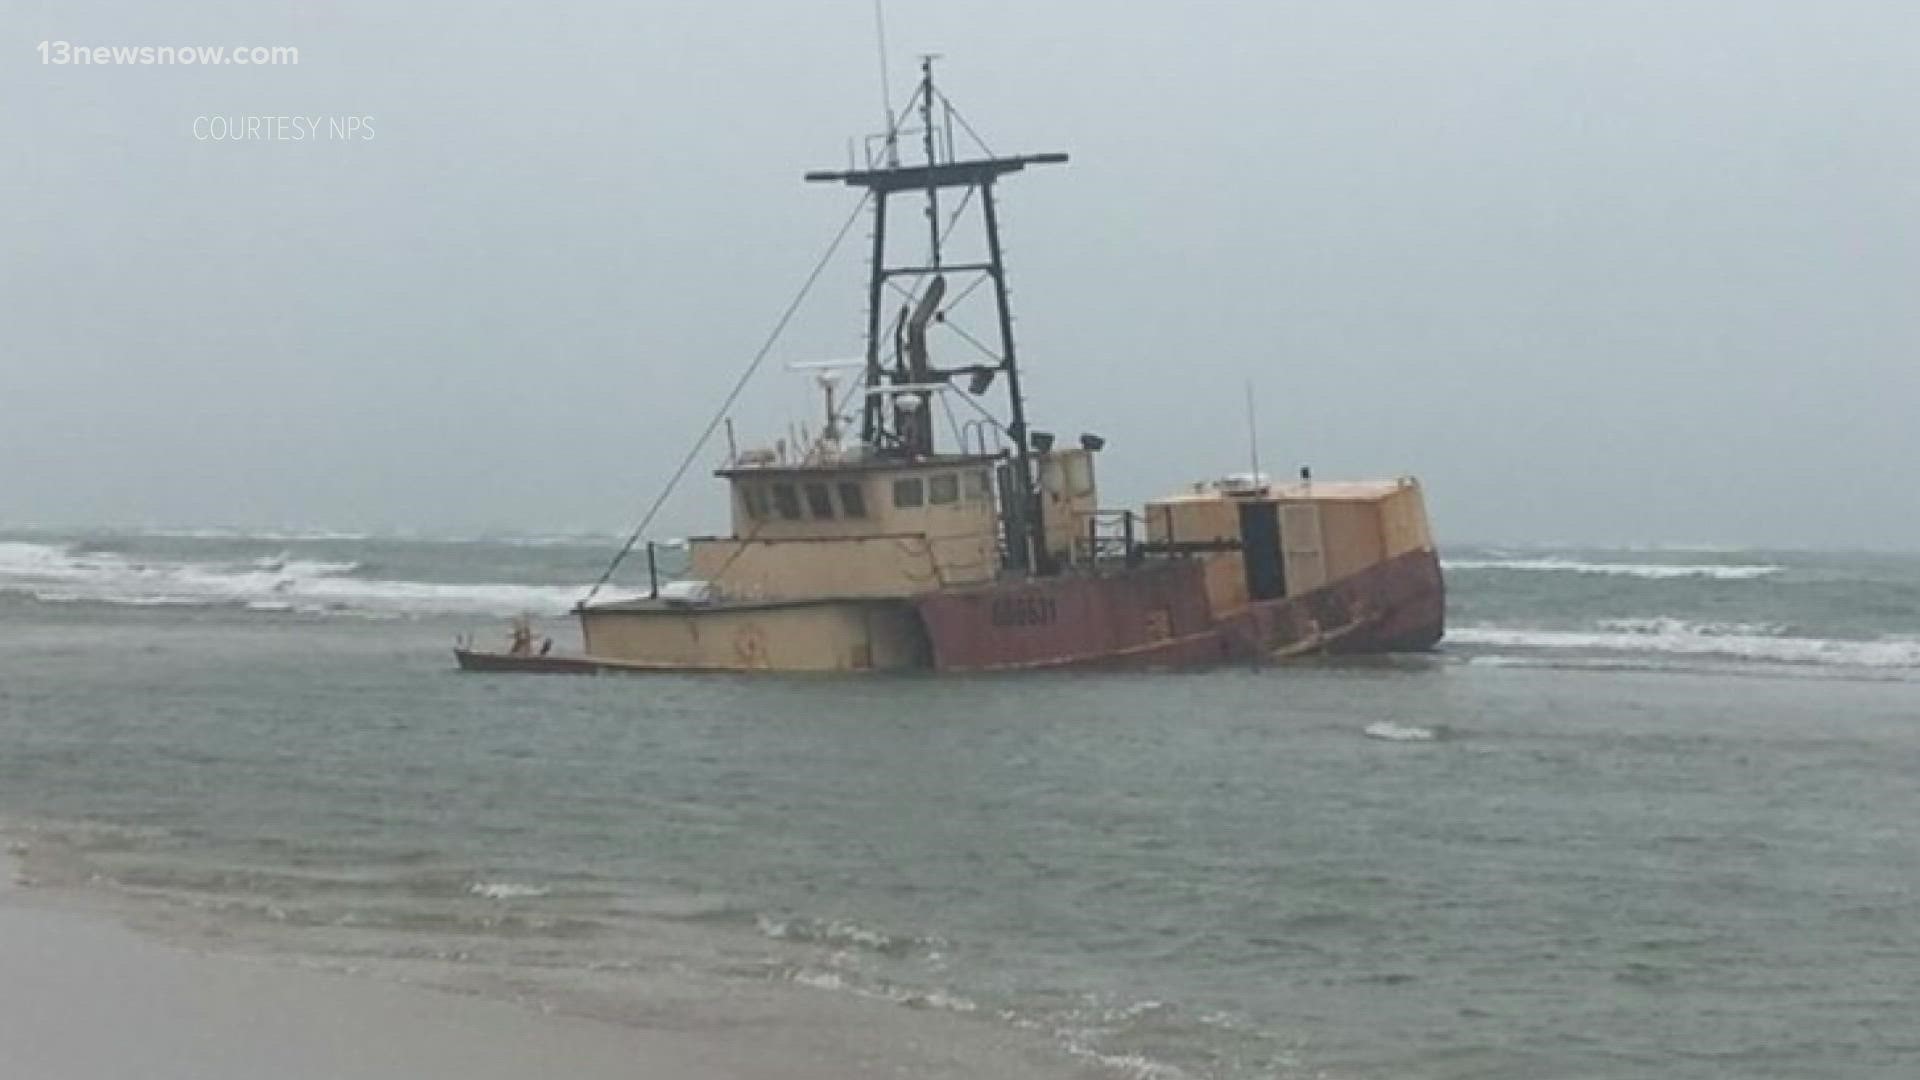 A North Carolina company is going to remove an abandoned vessel that ran aground on Cape Hatteras National Seashore last year.